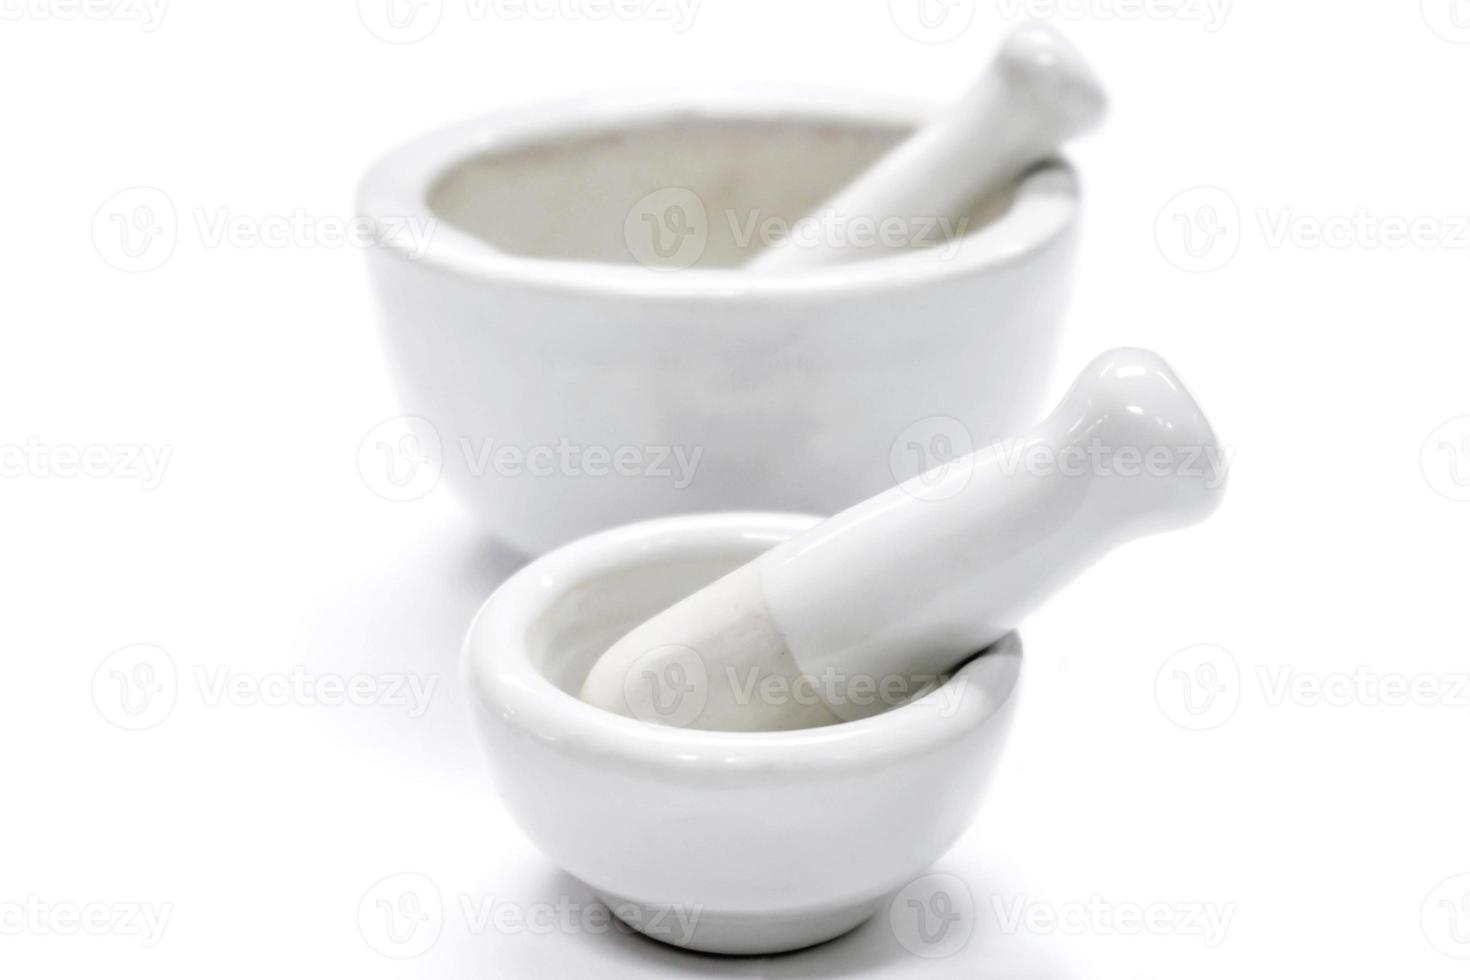 Herbs and medicine white mortars, Made by lime or ceramic on white background. photo